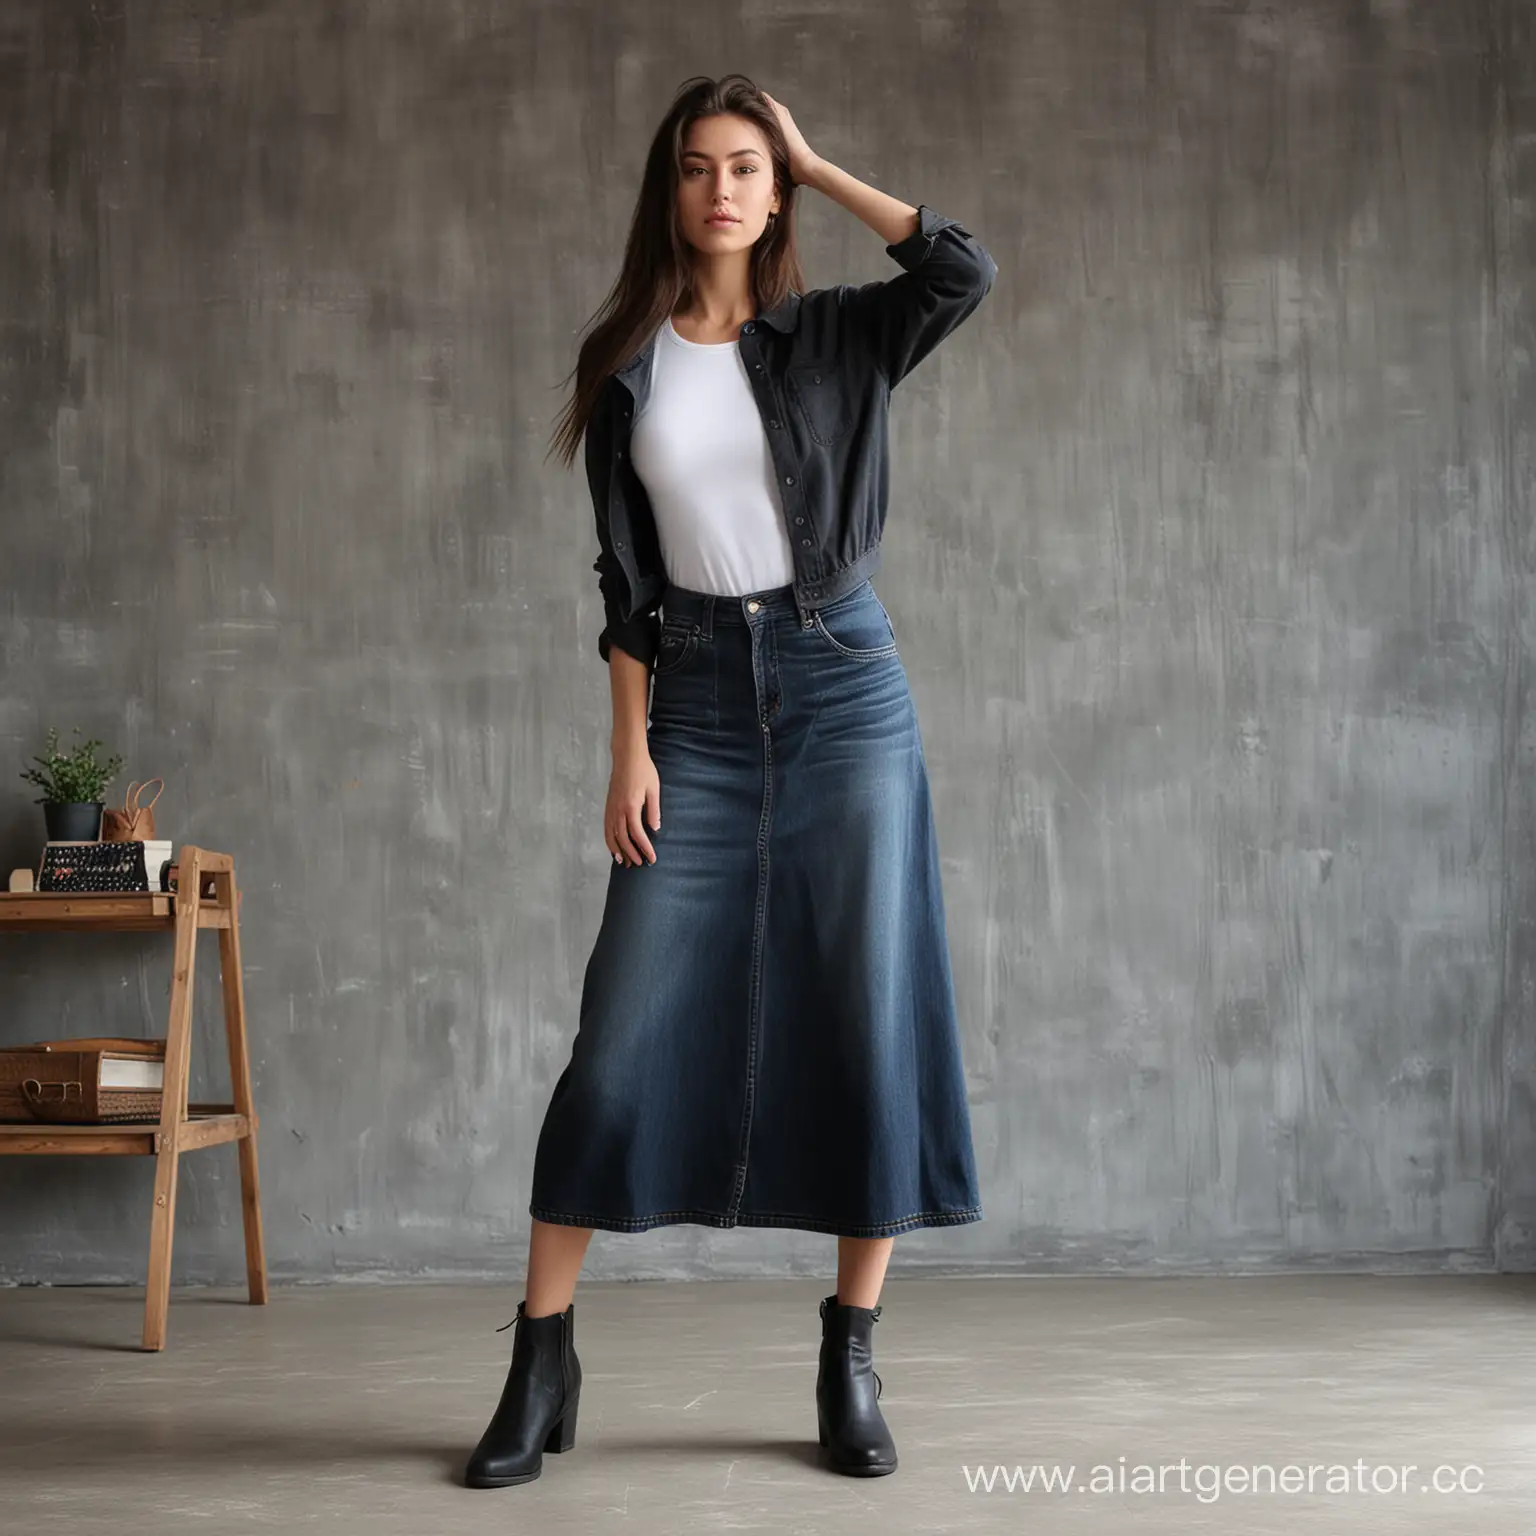 Fashionable-Young-Woman-in-Denim-Skirt-Poses-in-Urban-Loft-Setting